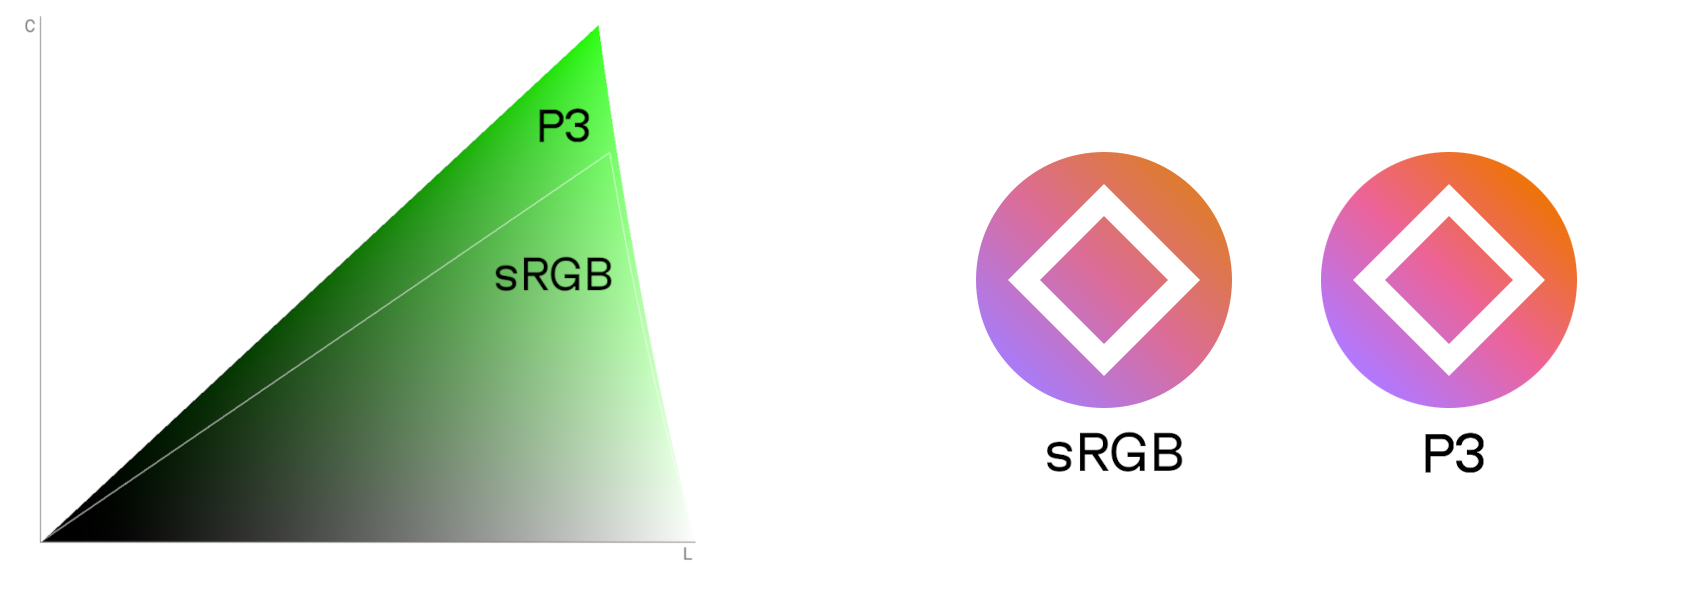 On the left side, a shape shows the extra P3 colors extending from sRGB, represented as an extended wedge from the original shape. On the right side, the left icon is rendered in sRGB, and the right icon is rendered with P3 colors, showing how they are more vibrant.